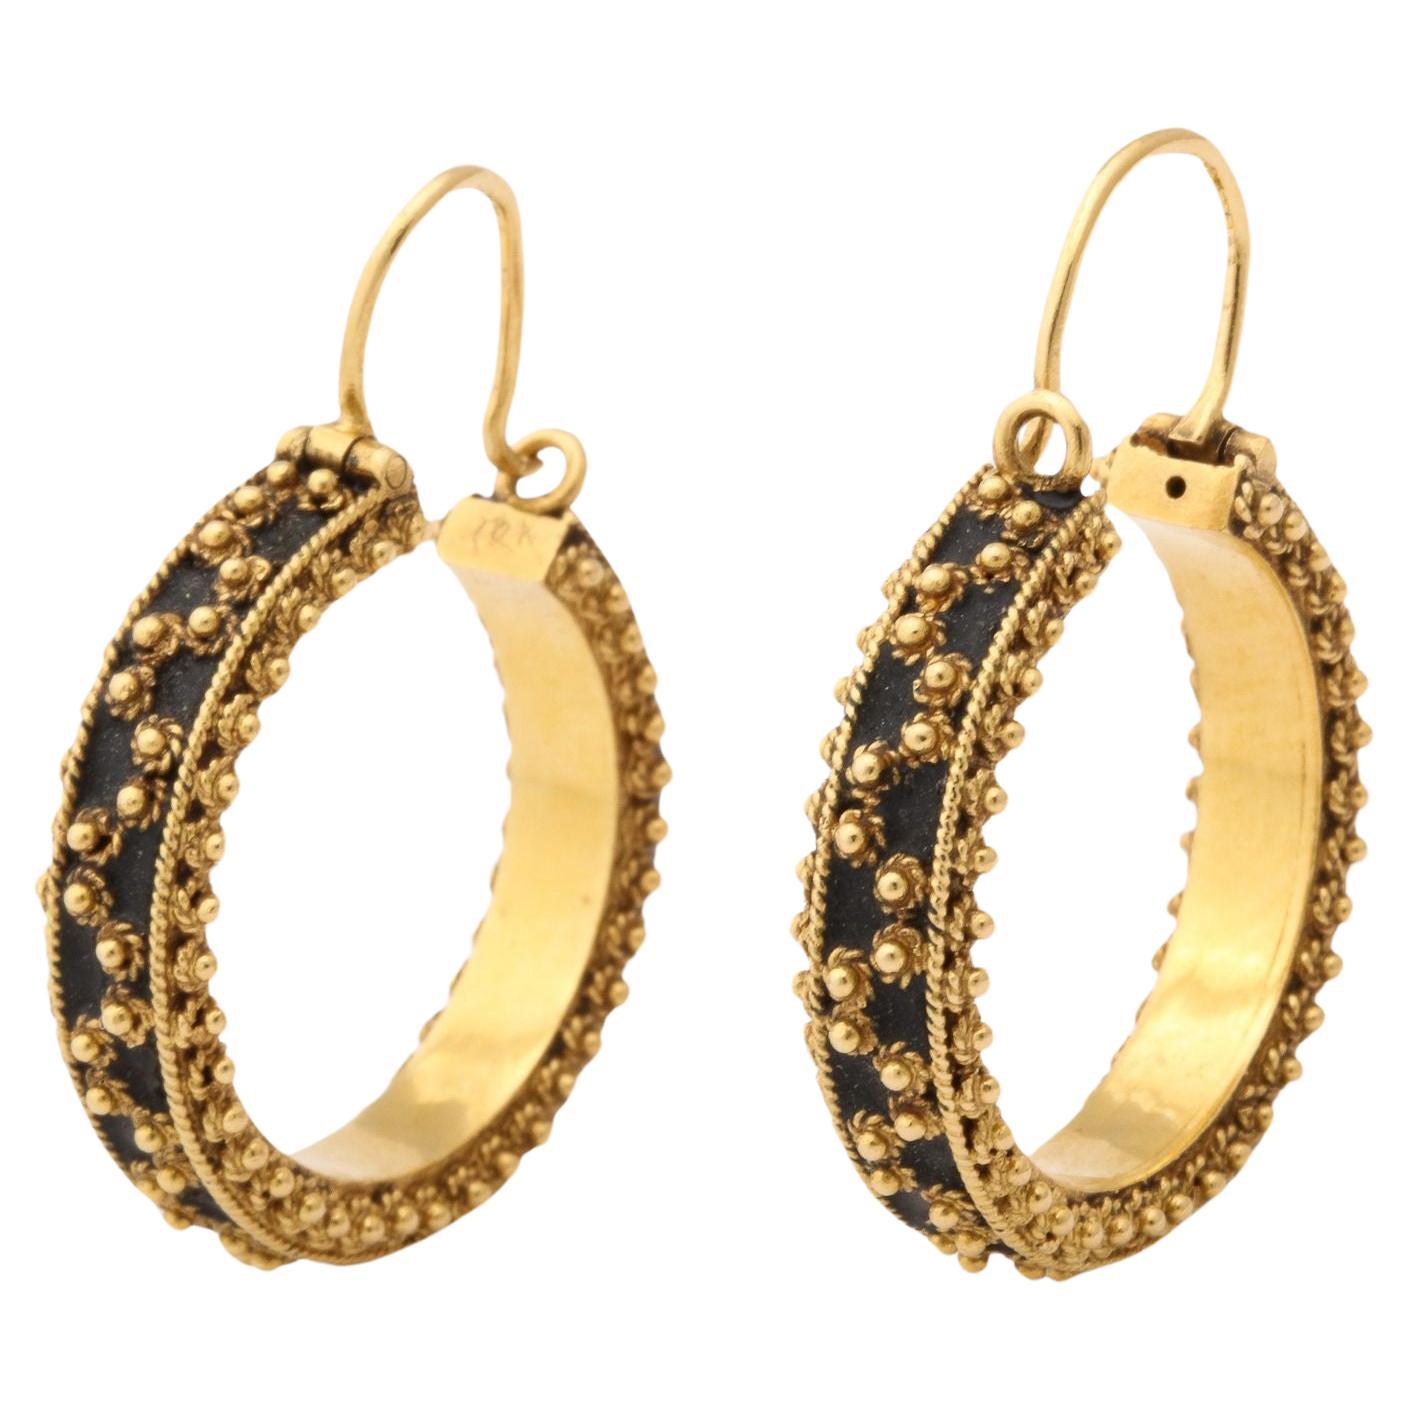 18 k Gold Articulated  Hoop Earrings With Bead Work For Sale